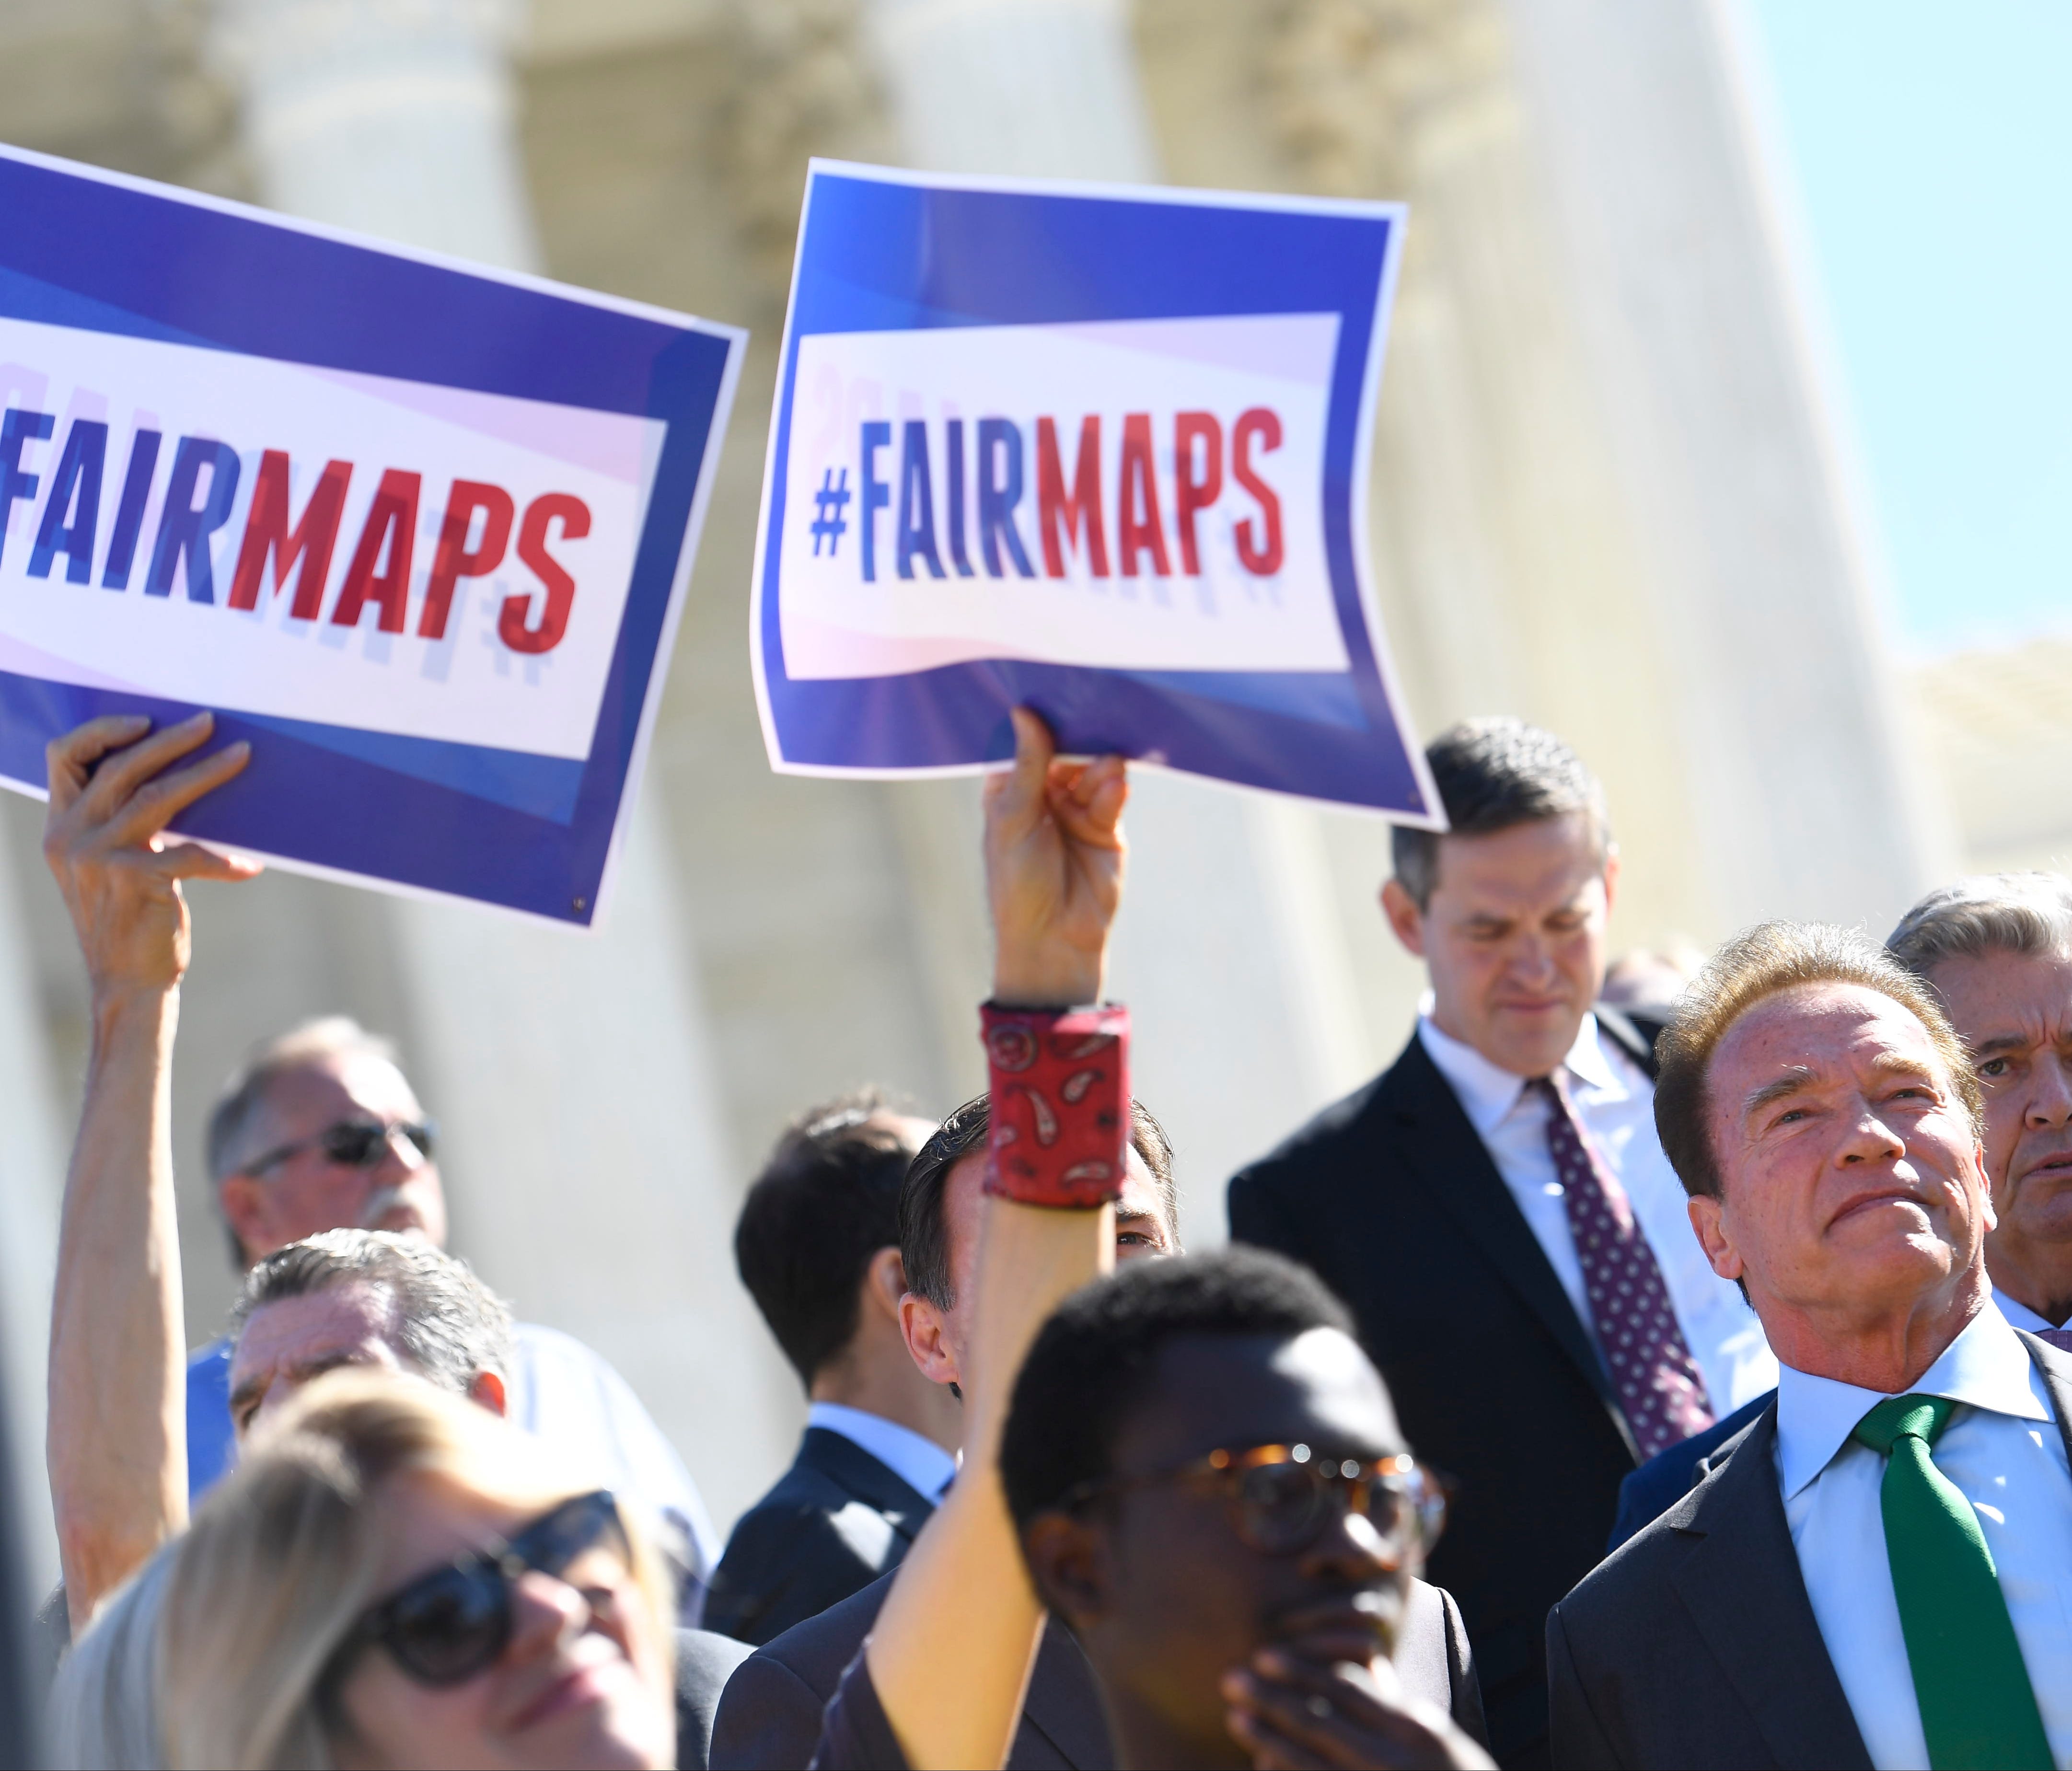 Opponents of gerrymandering including former Republican governor of California Arnold Schwarzenegger outside the Supreme Court in October.